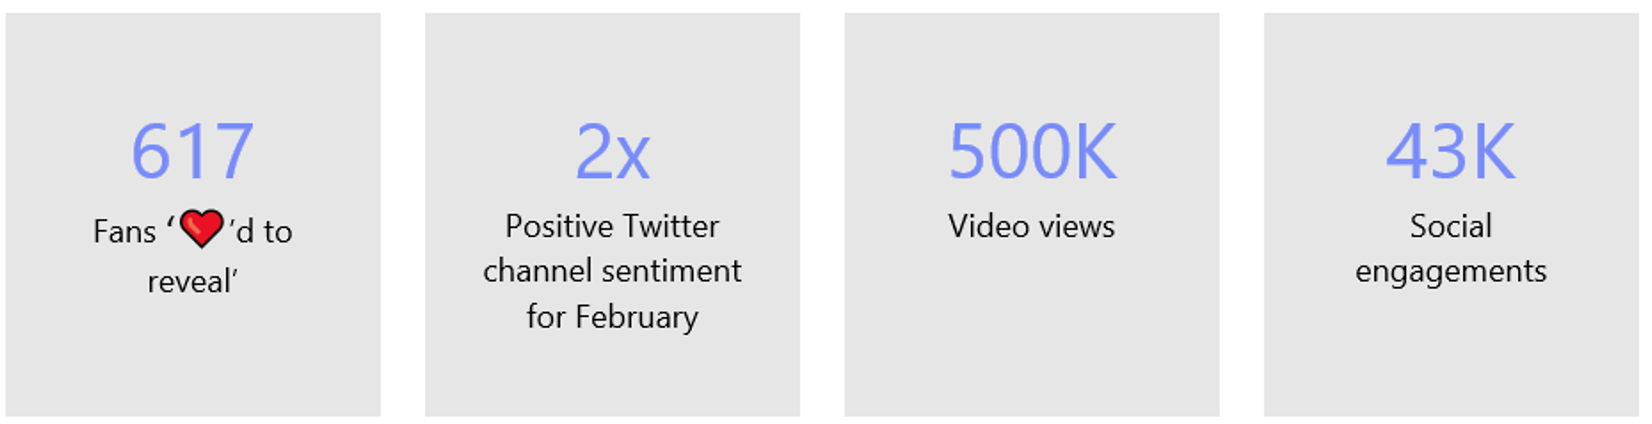 Interim statistics from Microsoft's social media campaign. 617 fans engaged with the 'show more' campagin on Twitter. There was 2x positive Twitter channel sentiment for February (campaign month). There were 500K video views. There were 43K social engagements.